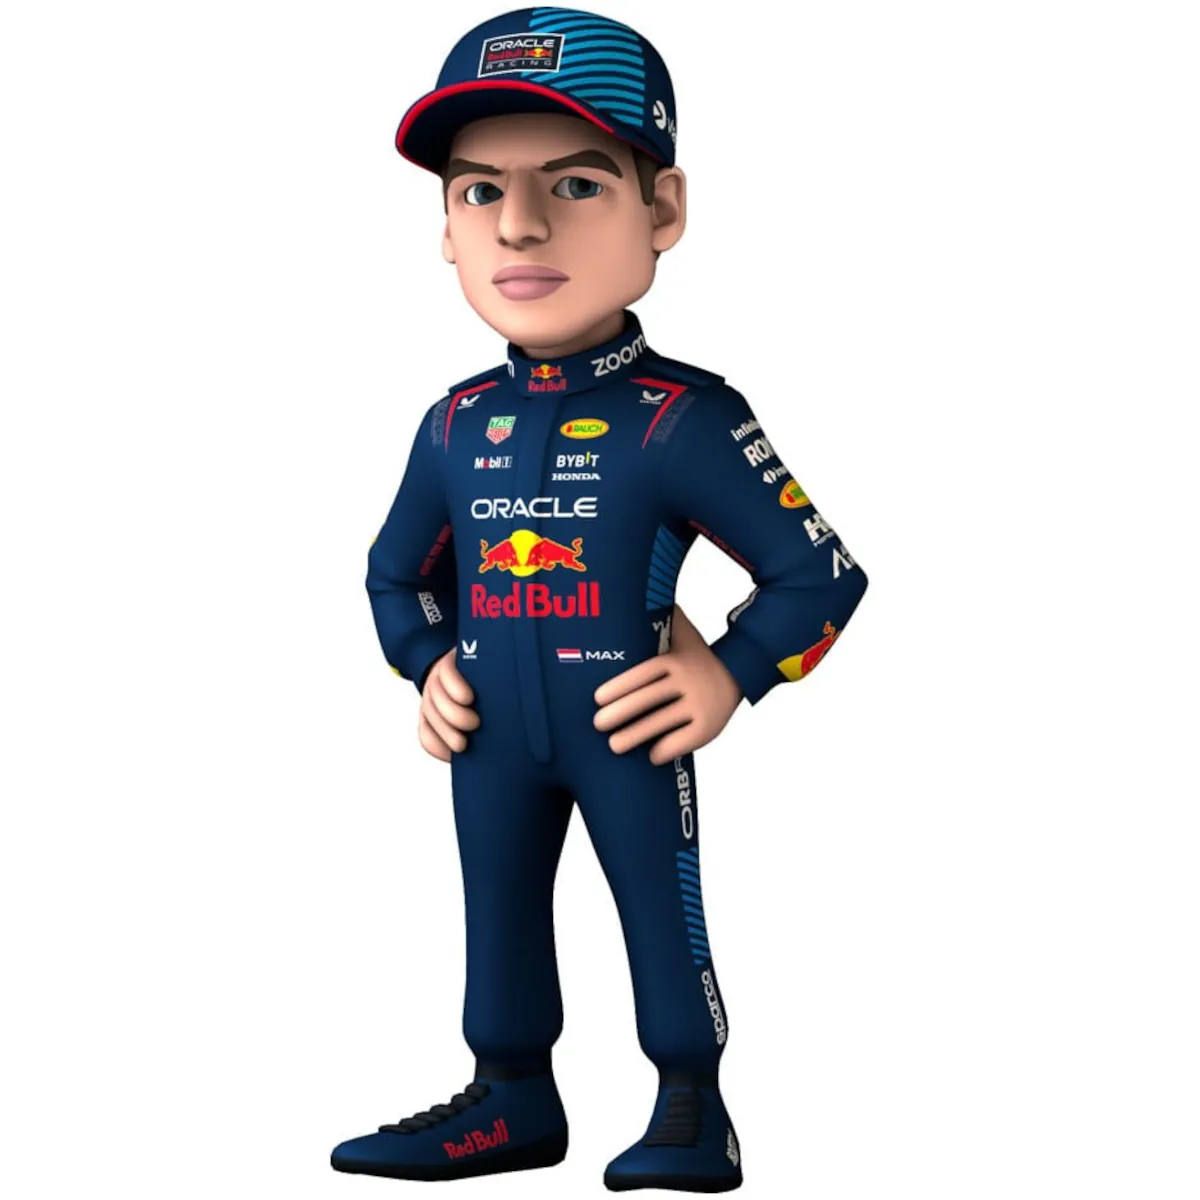 MN15283 Max Verstappen 'Oracle Red Bull Racing' (Formula 1) 12cm MINIX Collectable Figure